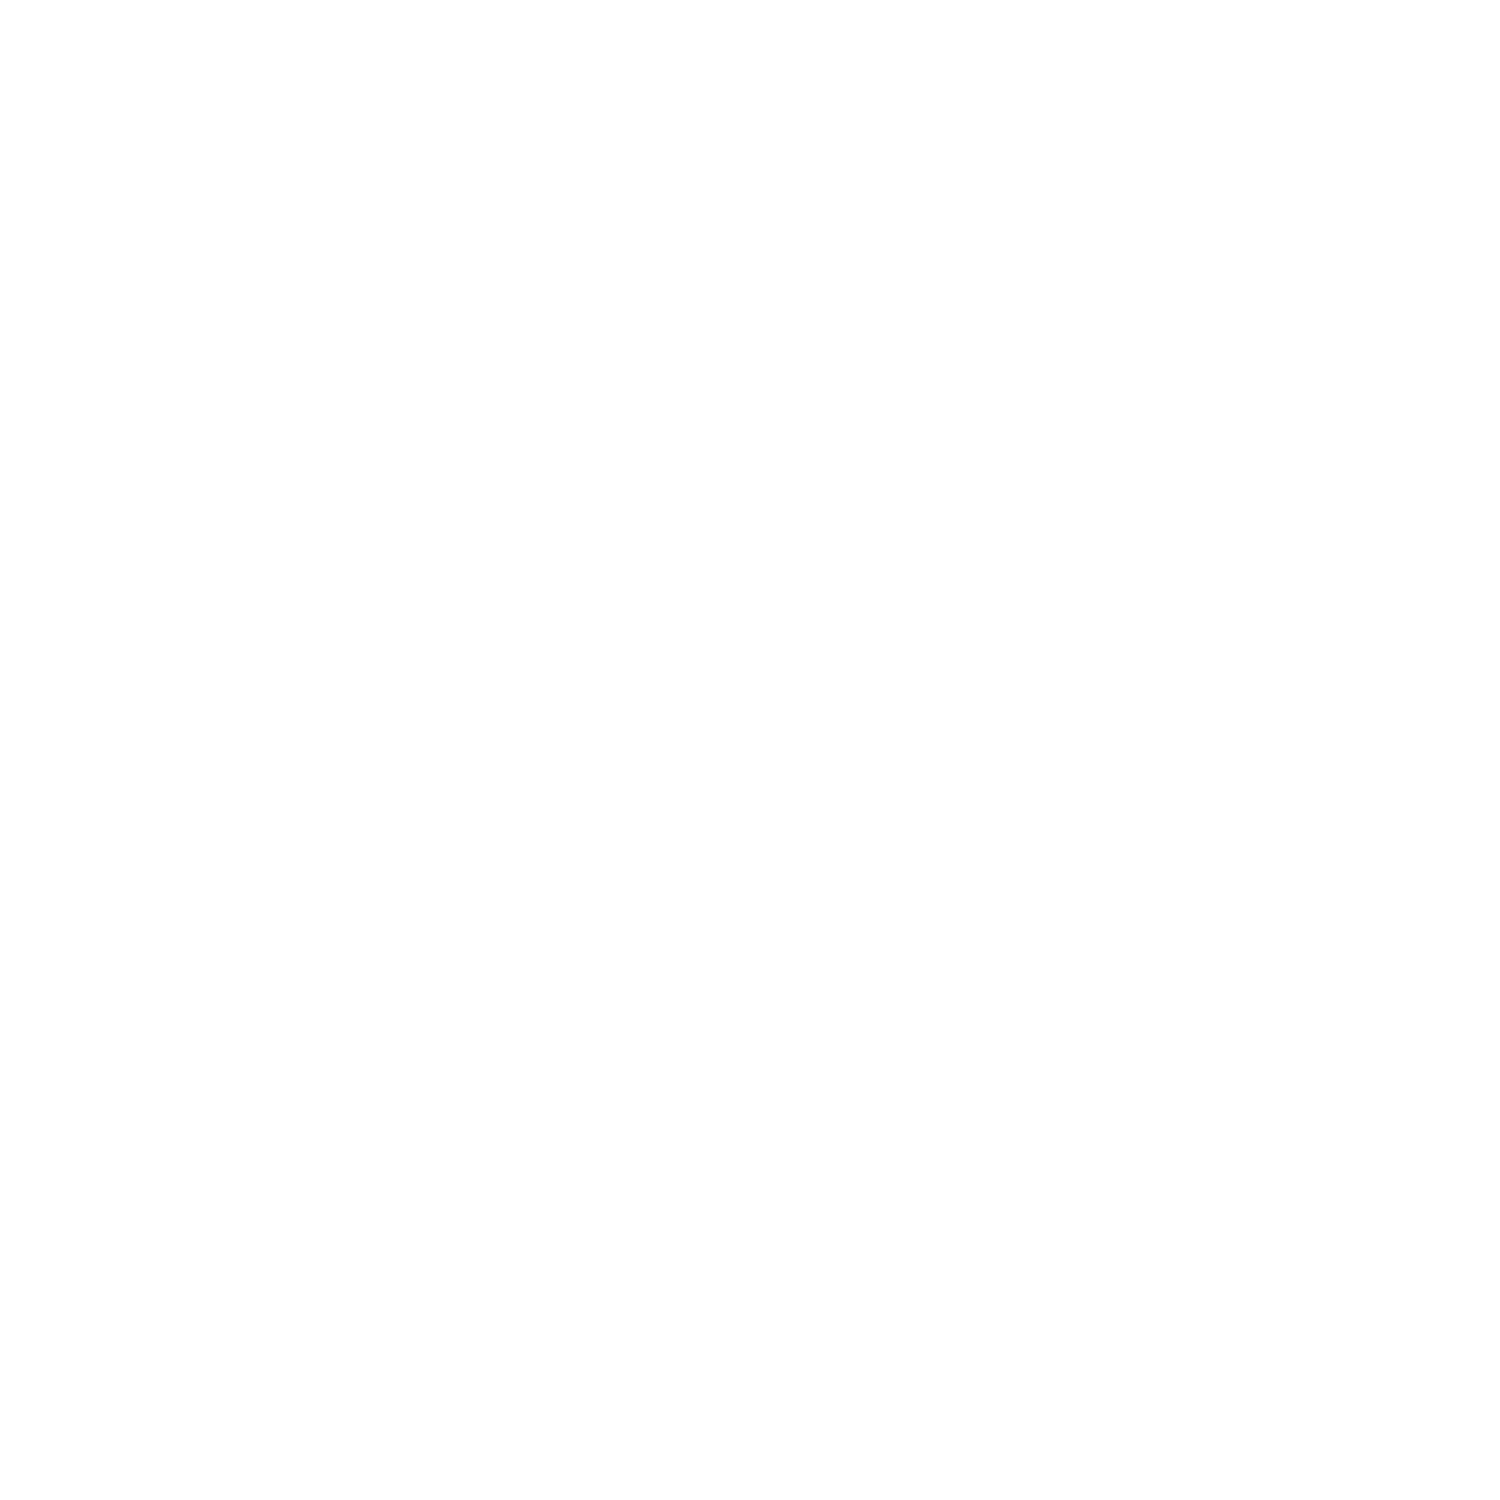 Disability-owned Sharp Mill business logo.